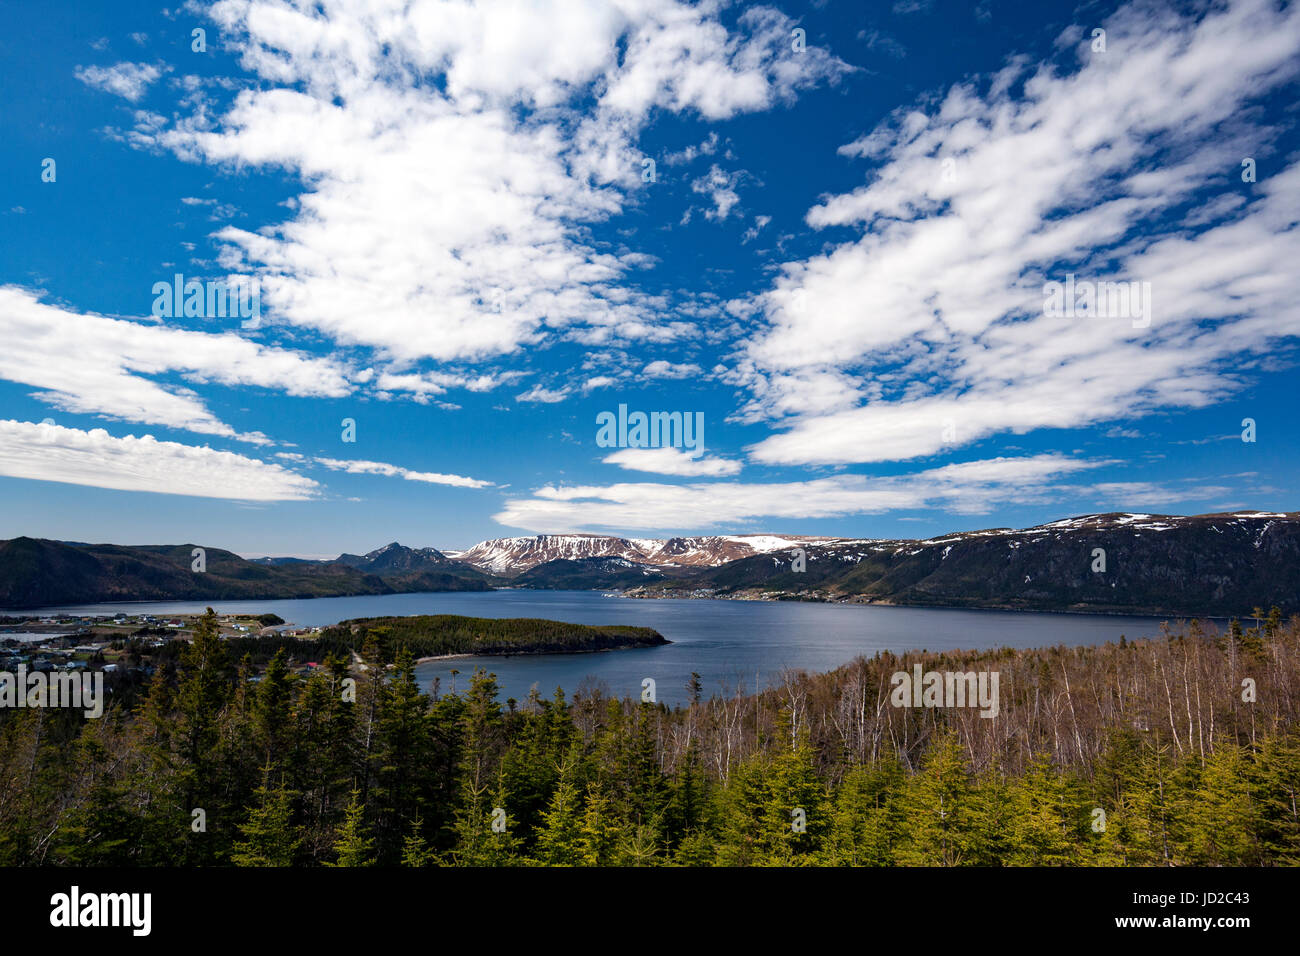 Norris Point Lookout - Gros Morne National Park, Norris Point, Newfoundland, Canada Stock Photo